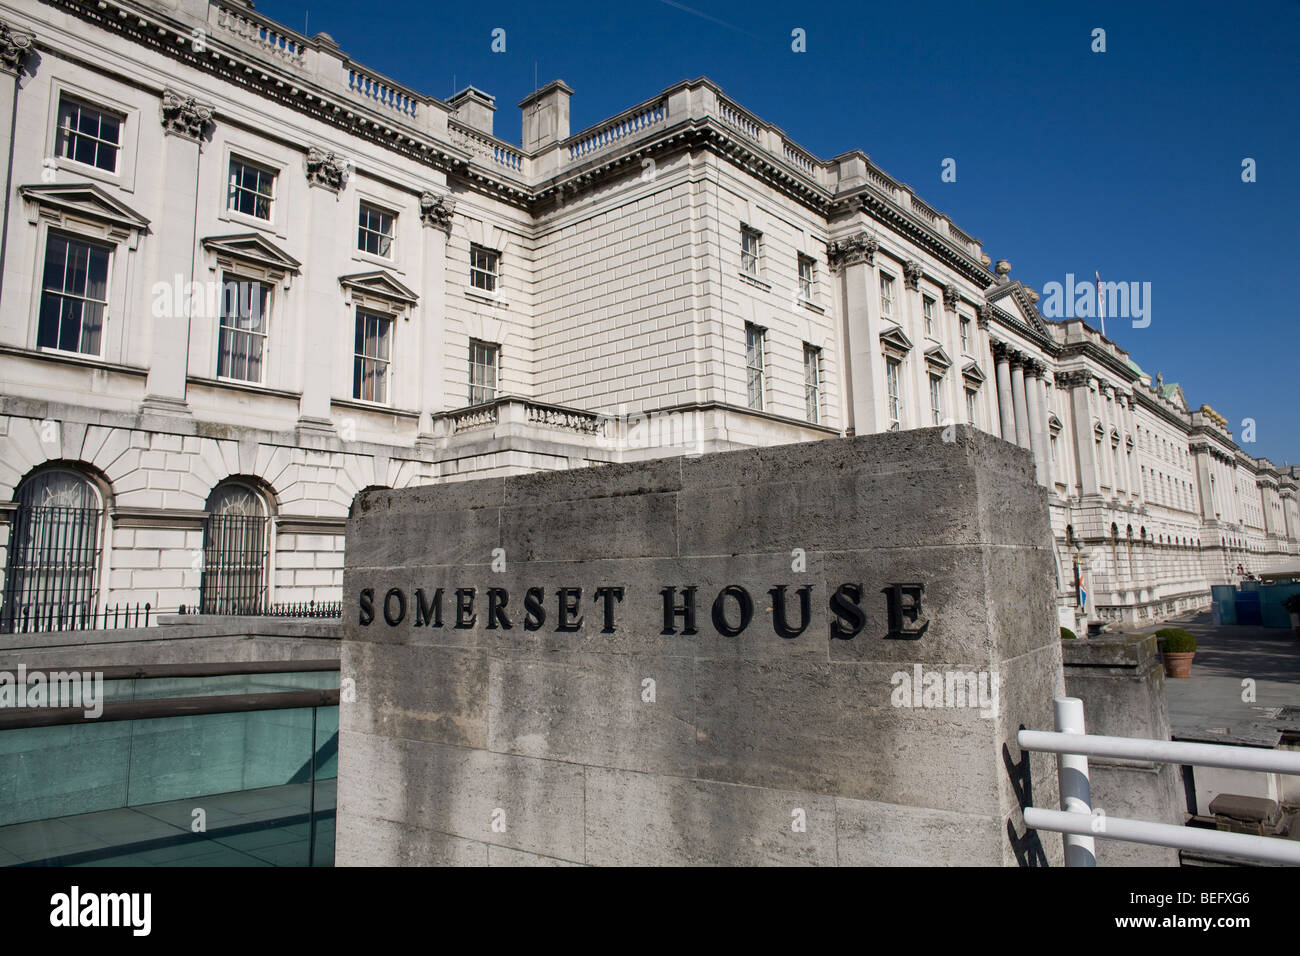 Somerset House, HQ for the Inland Revenue, by the banks of the River Thames in central London Stock Photo